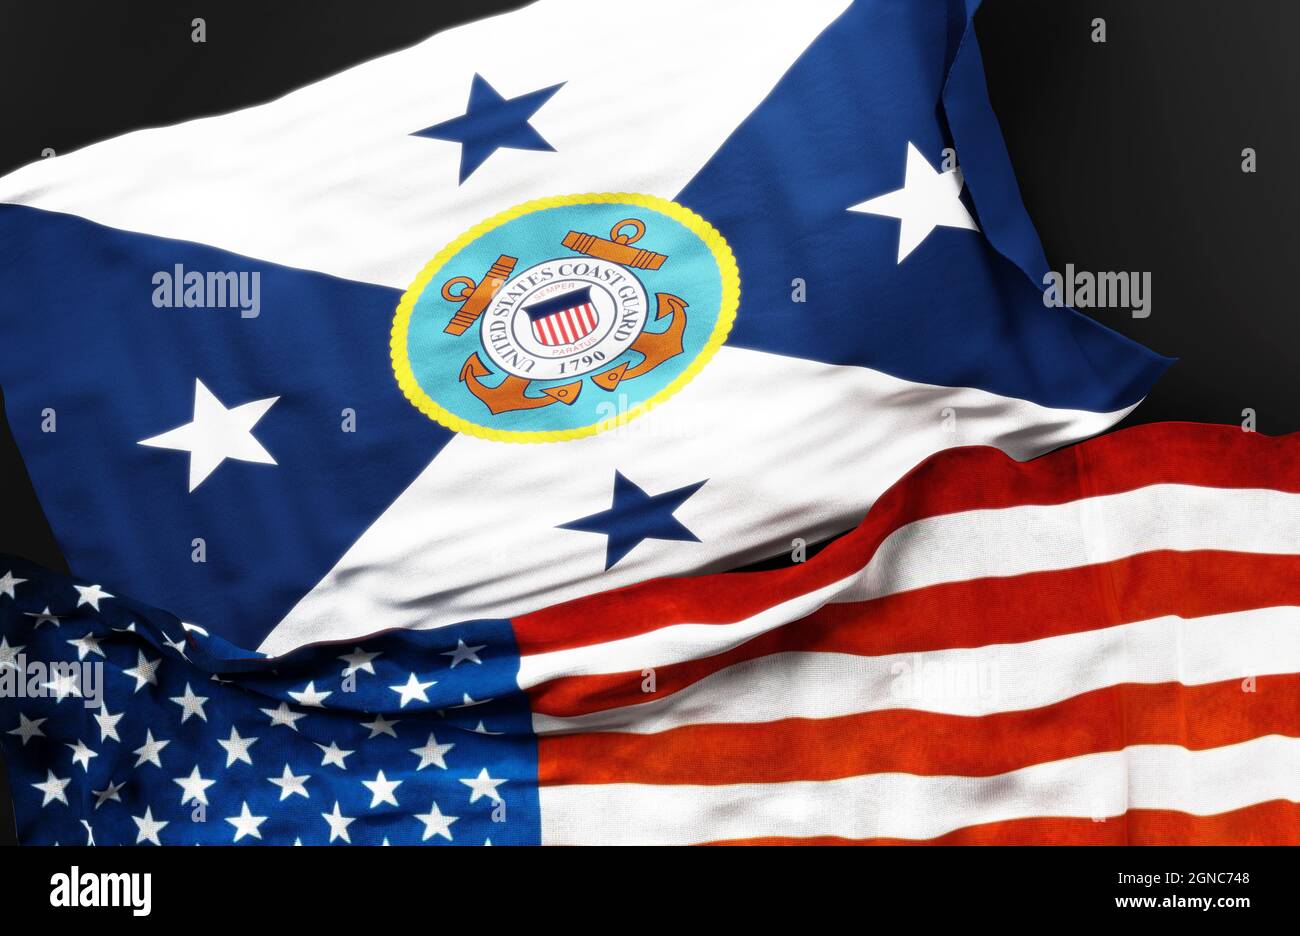 Flag of the Vice Commandant of the USCG along with a flag of the United States of America as a symbol of a connection between them, 3d illustration Stock Photo